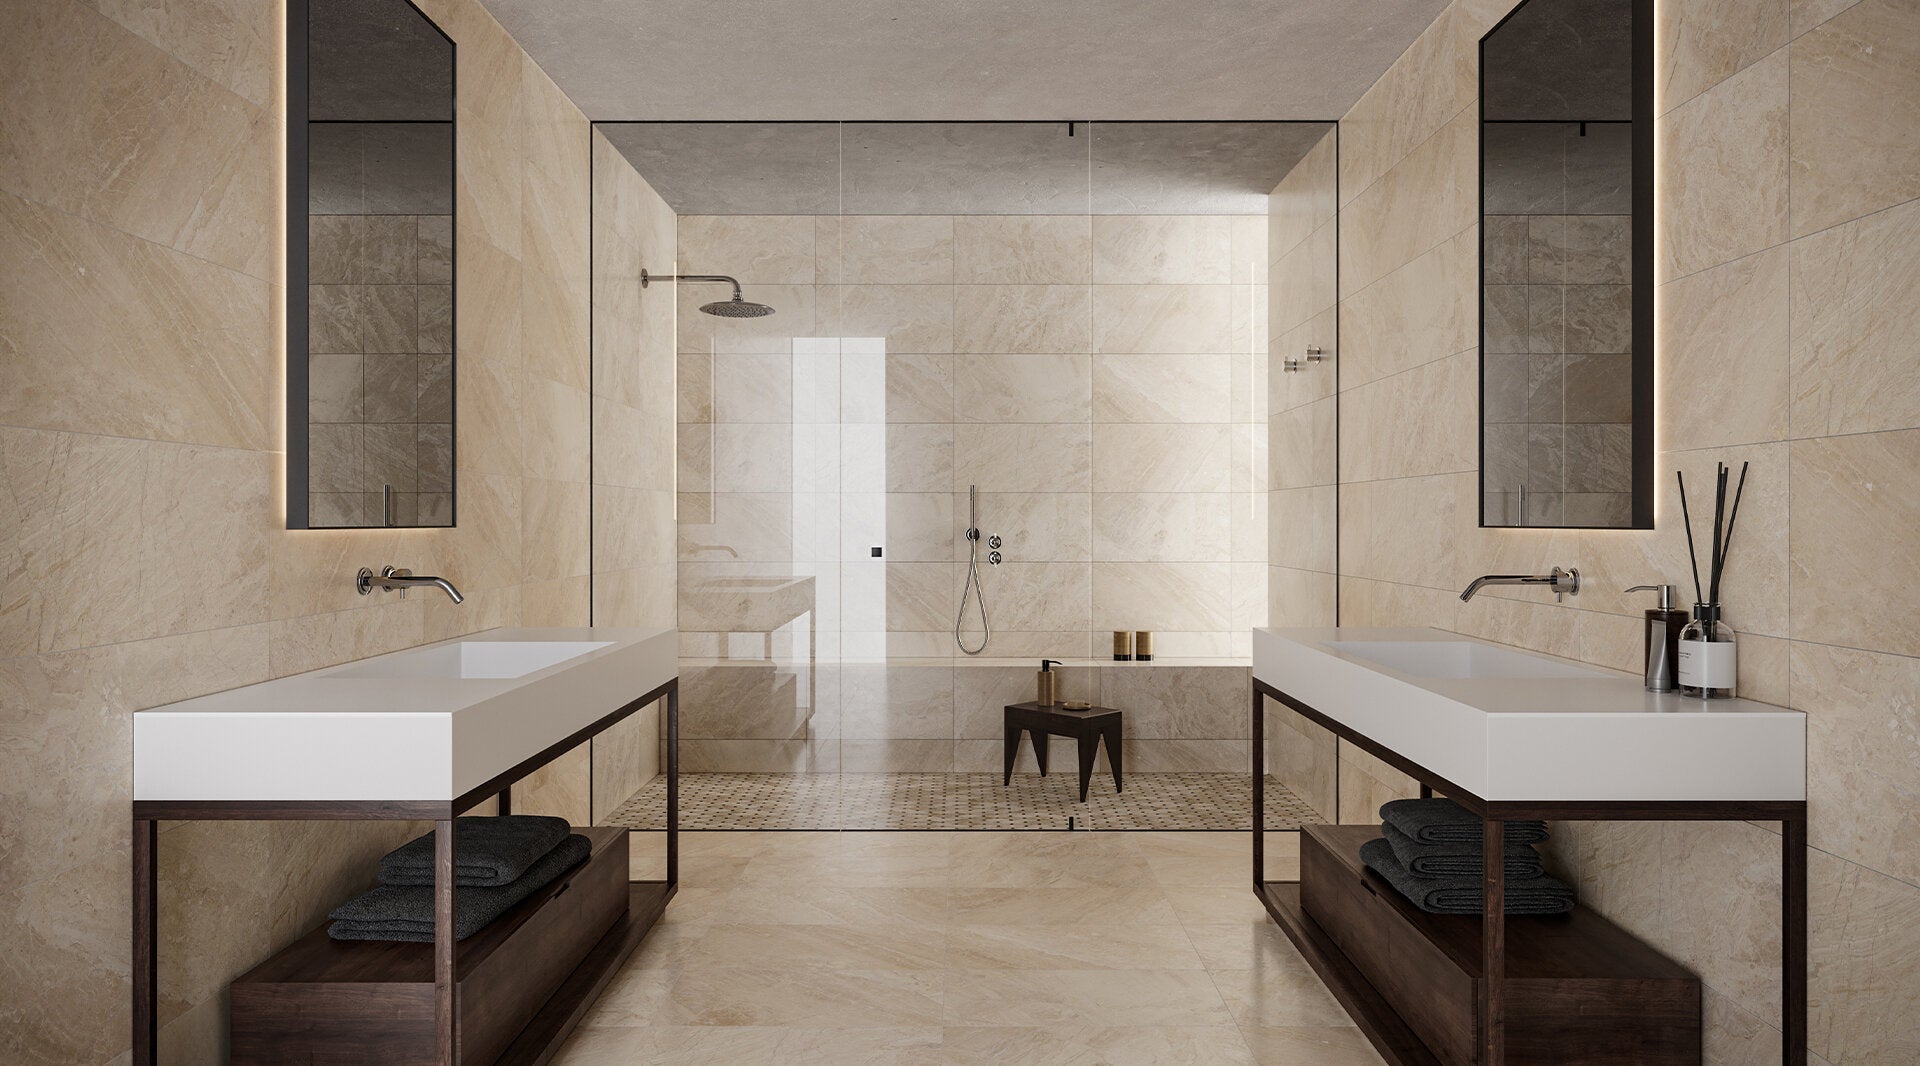 Elegant modern bathroom featuring Anatolia Industria porcelain tile collection with beige marble effect on walls and floor, dual white vanities, and walk-in shower.